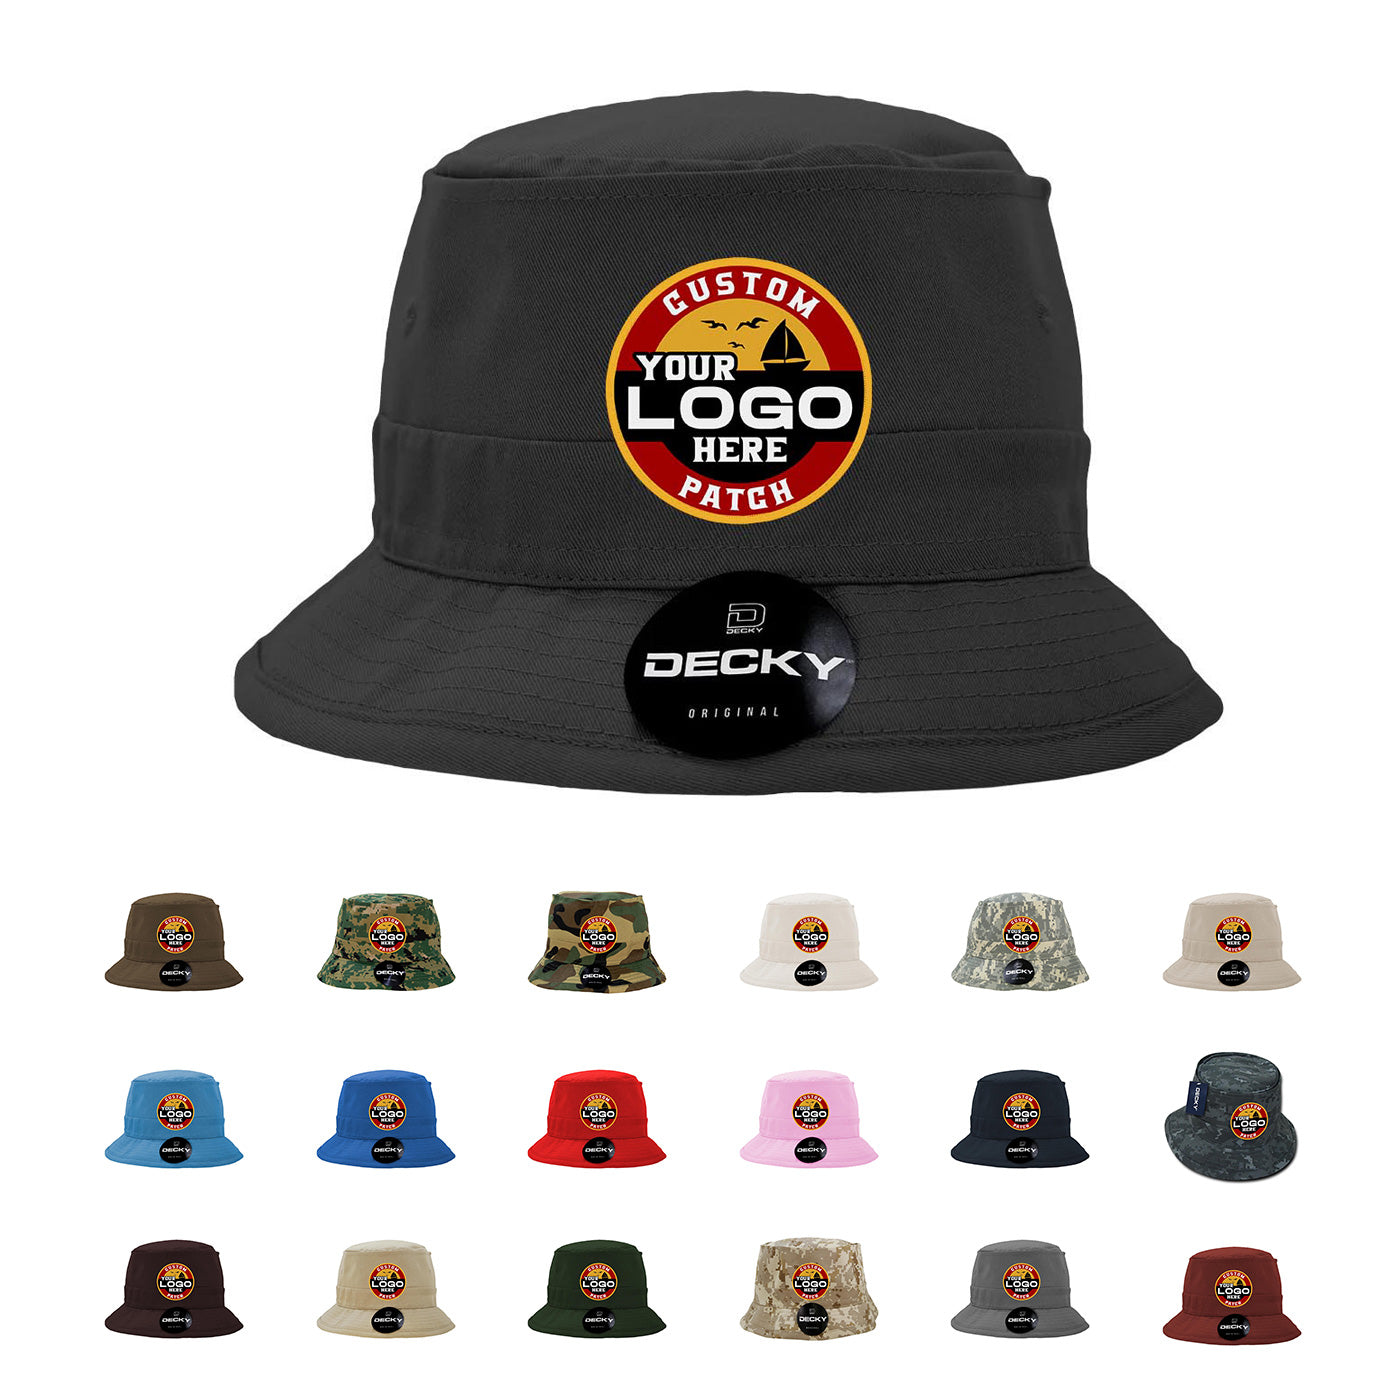 Custom Embroidered Decky 450 - Fisherman's Bucket Hat, Structured Fisherman's Hat